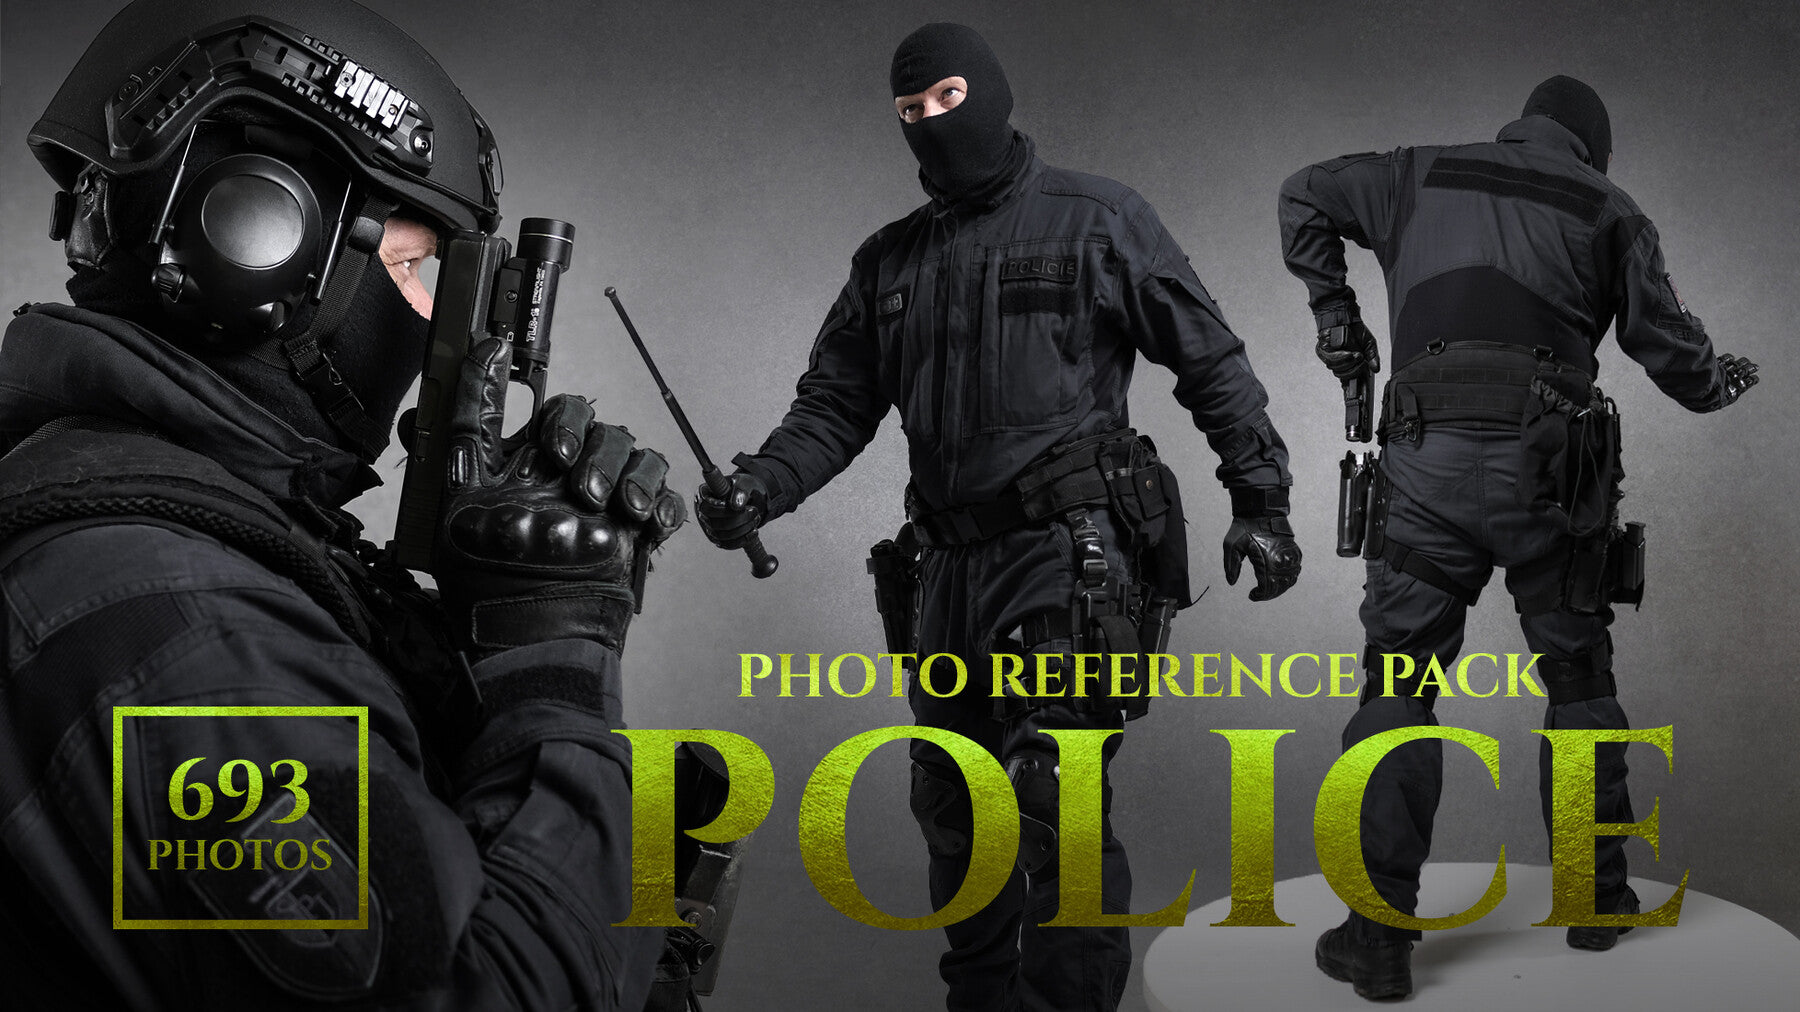 Police Photo Reference Pack For Artists 693 JPEGs